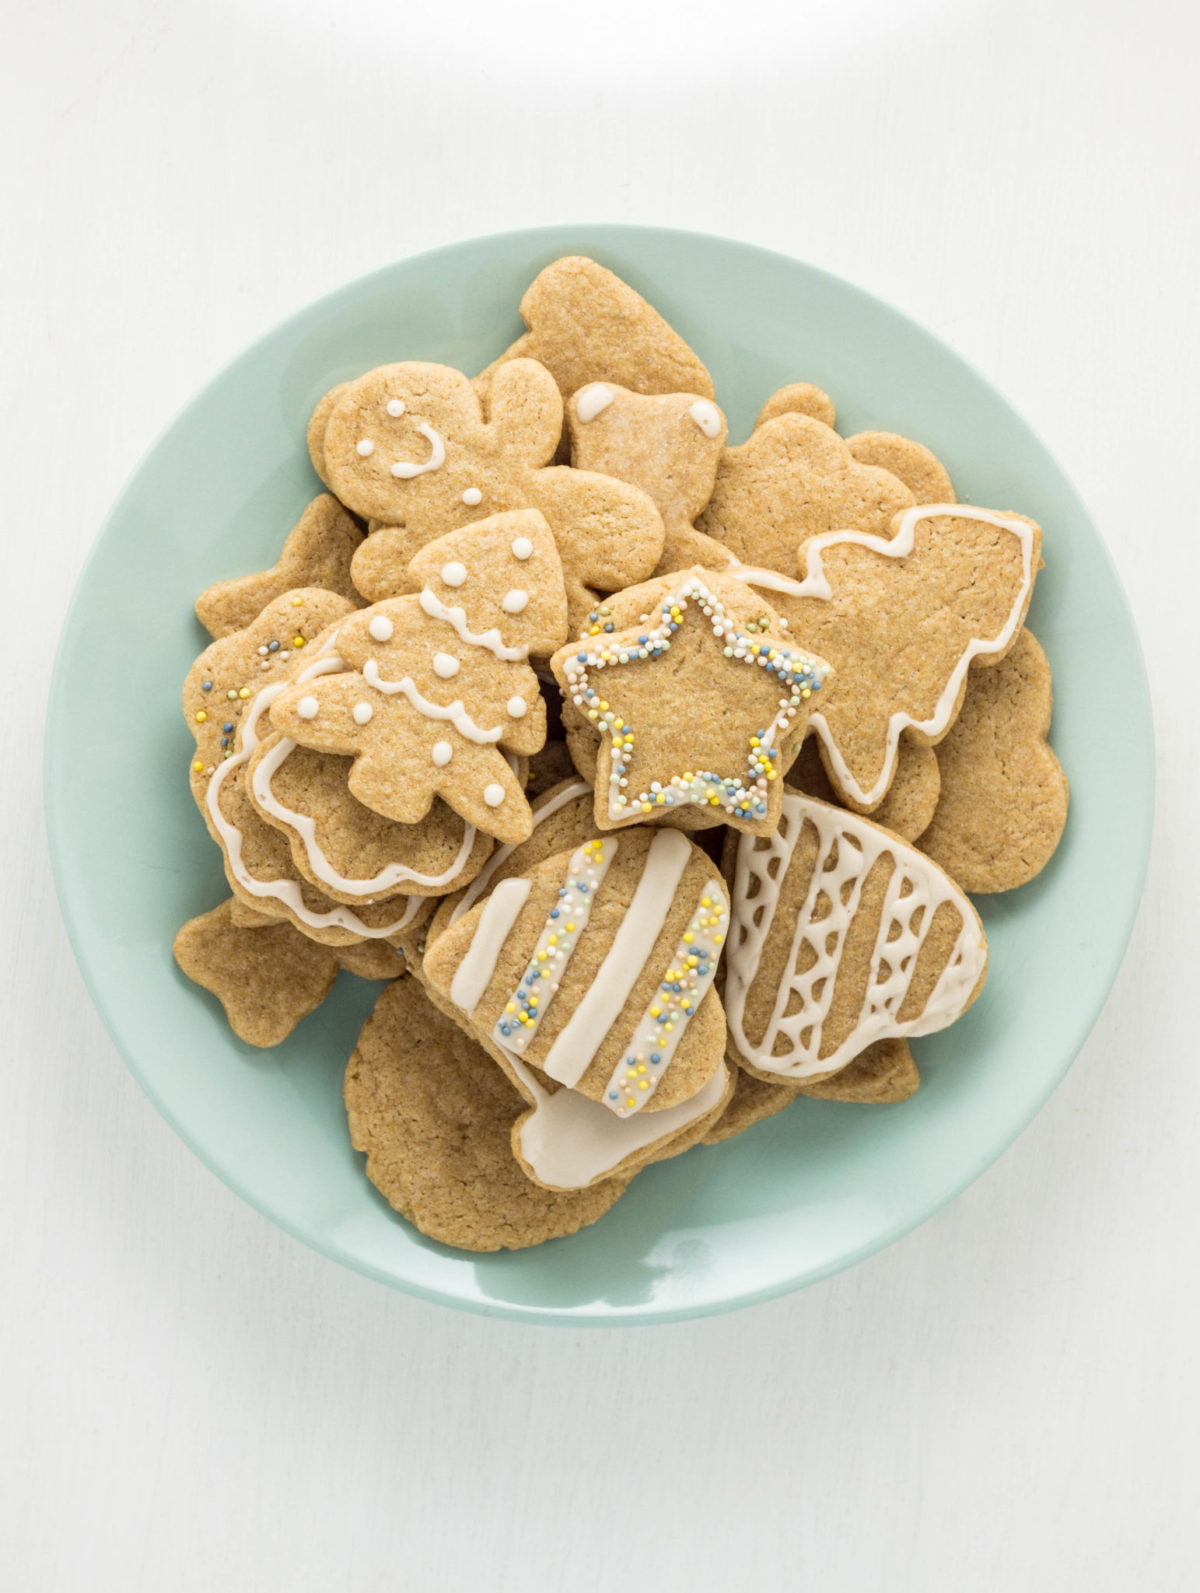 Top view of a plate of cut out cookies. 